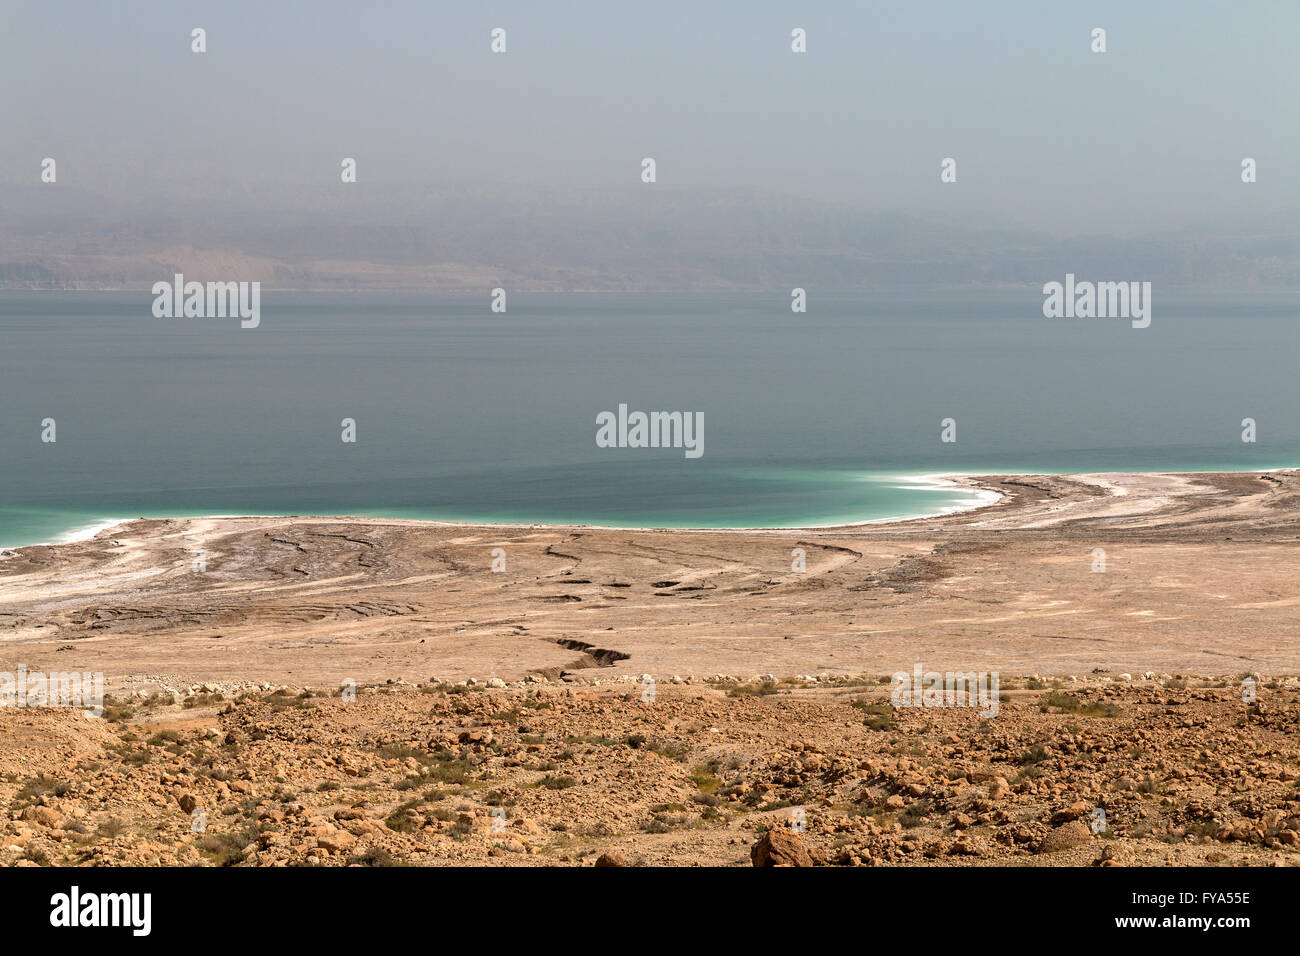 Dead Sea with depressions viewed from the Israeli side Stock Photo